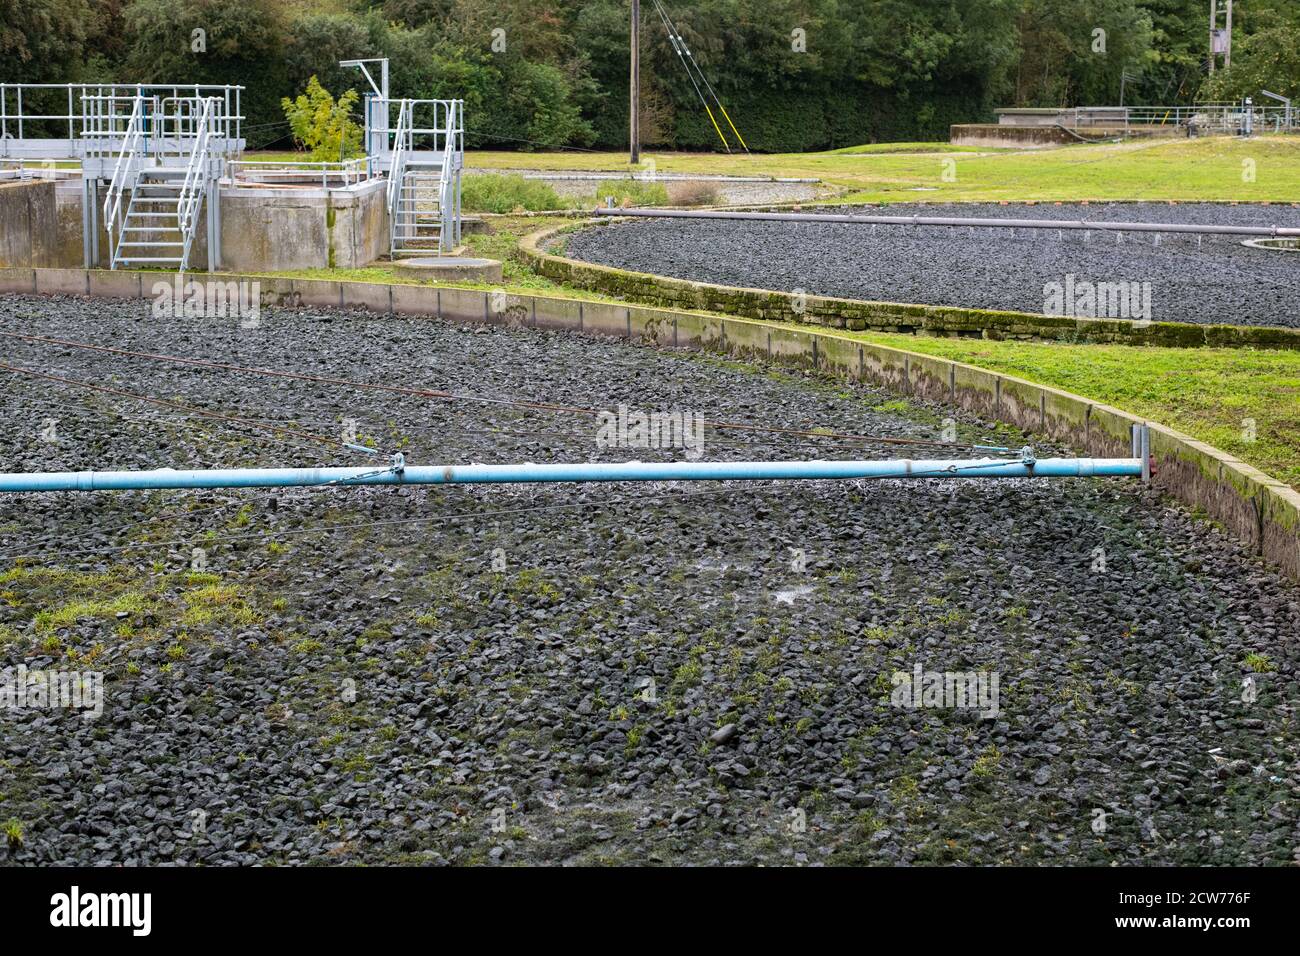 Sewage water treatment works filter bed - Richmond, North Yorkshire, England, UK Stock Photo